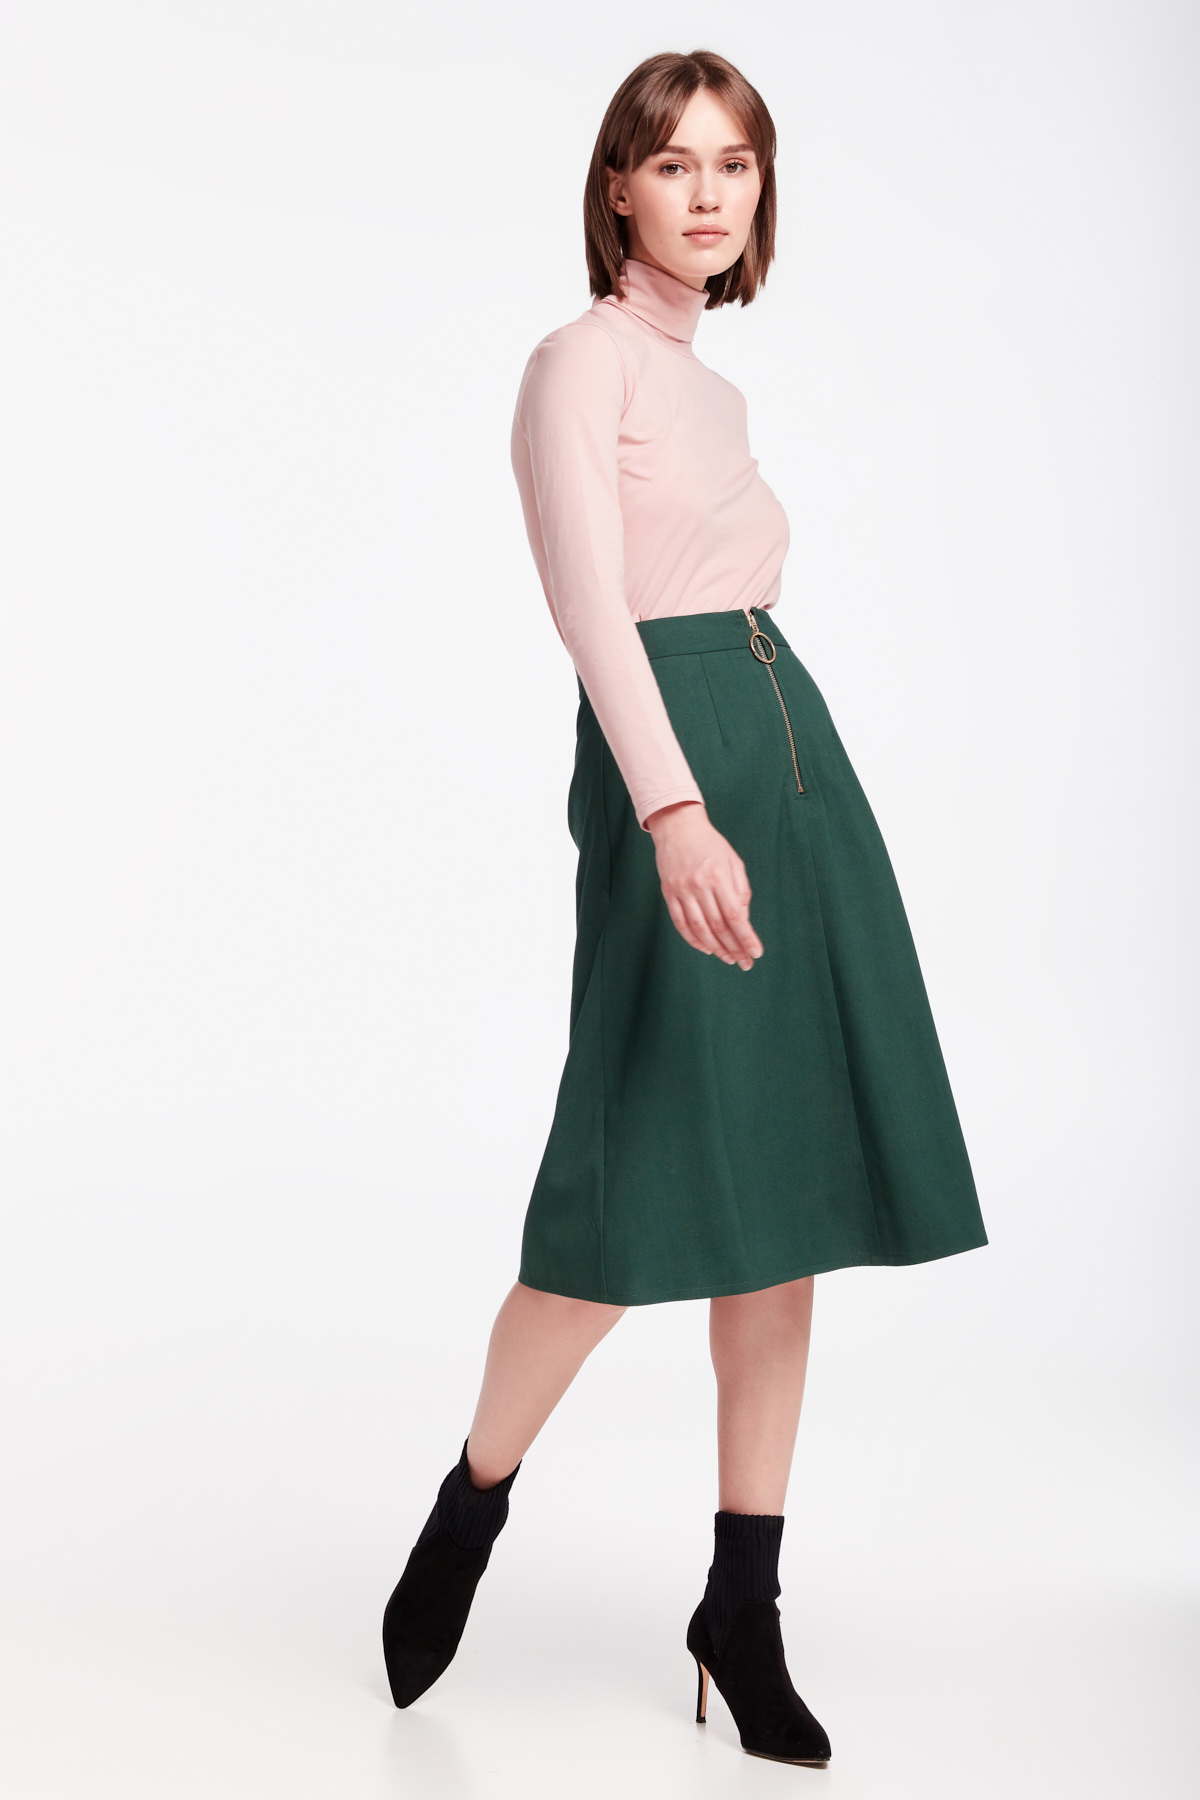 Green midi dress with a front zip, photo 11